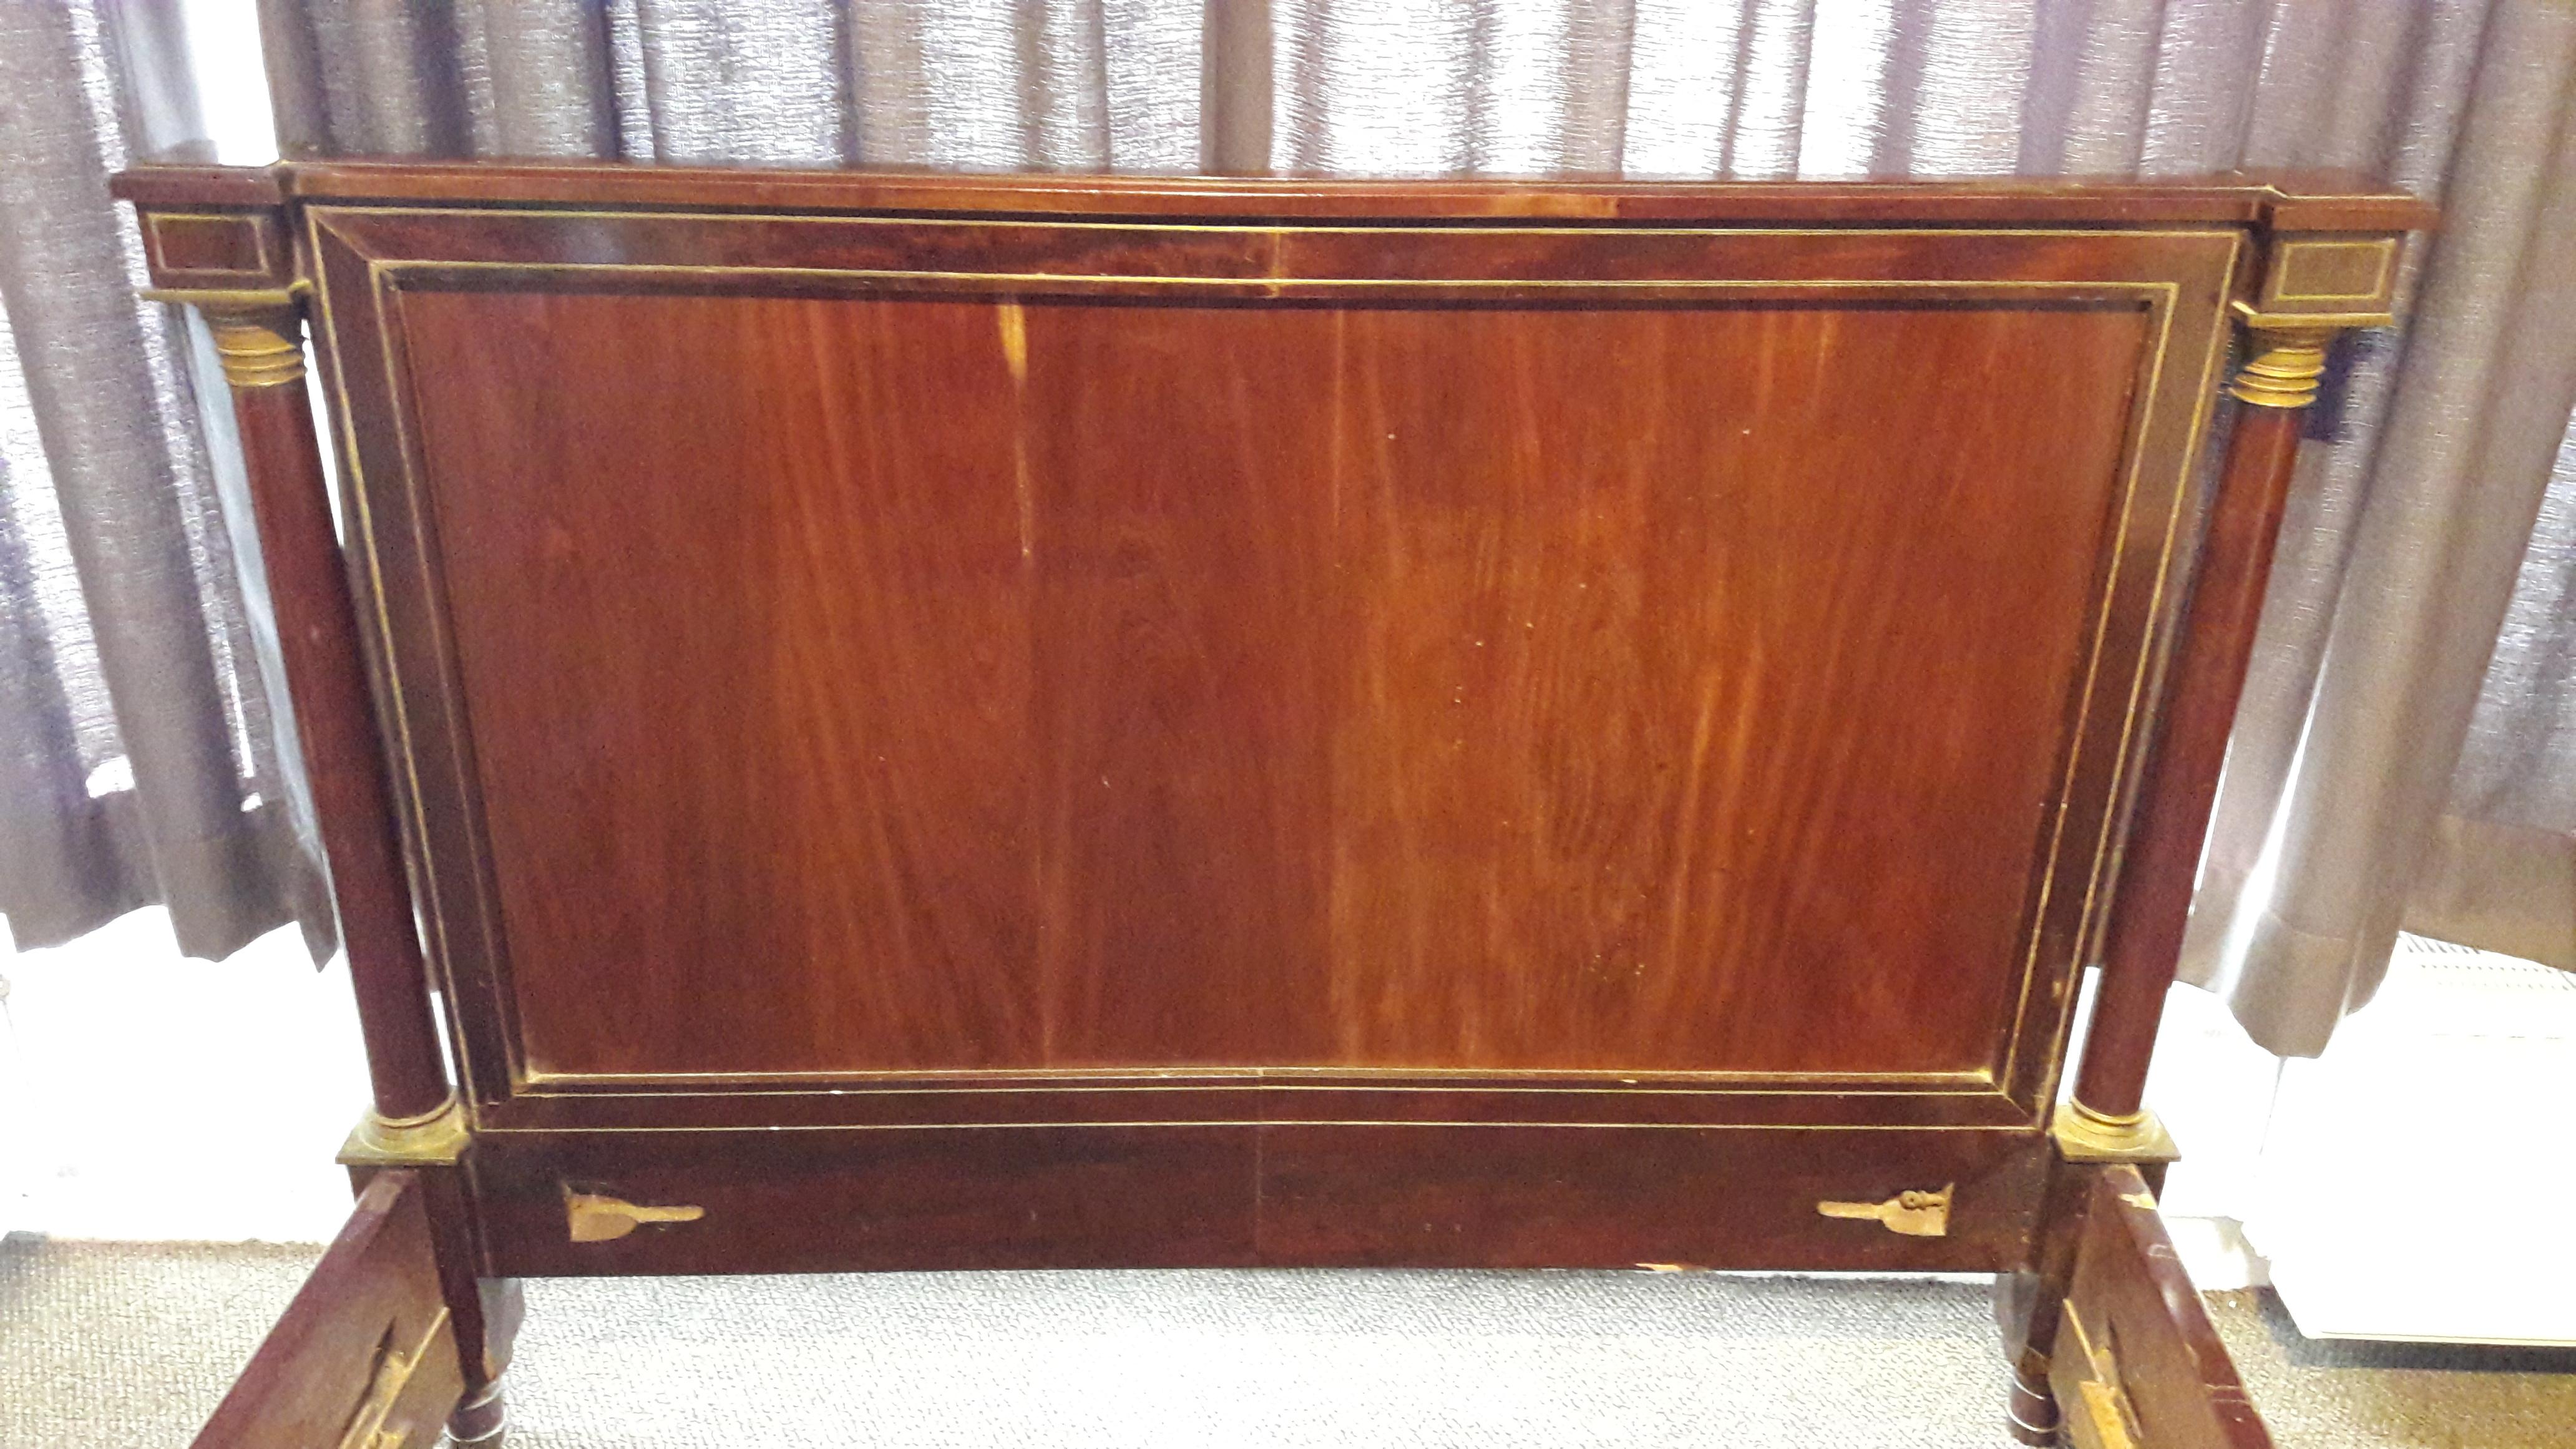 Mahogany Empire Bed Frame In Fair Condition For Sale In Antwerp, Antwerp